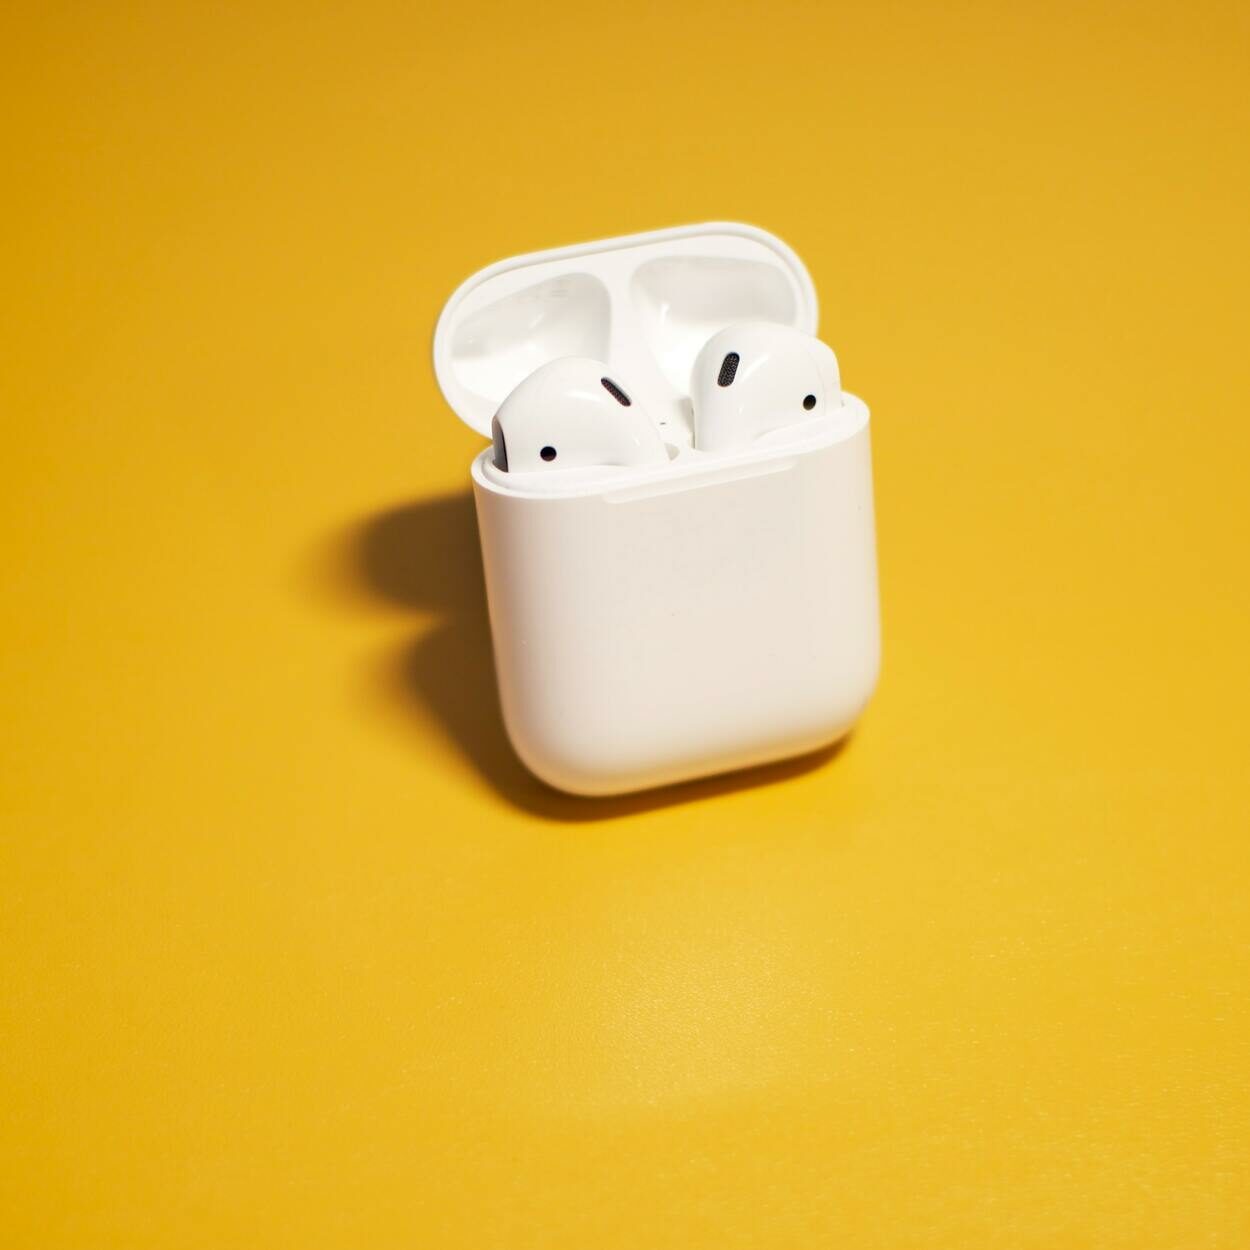 Apple's AirPod Charging Case